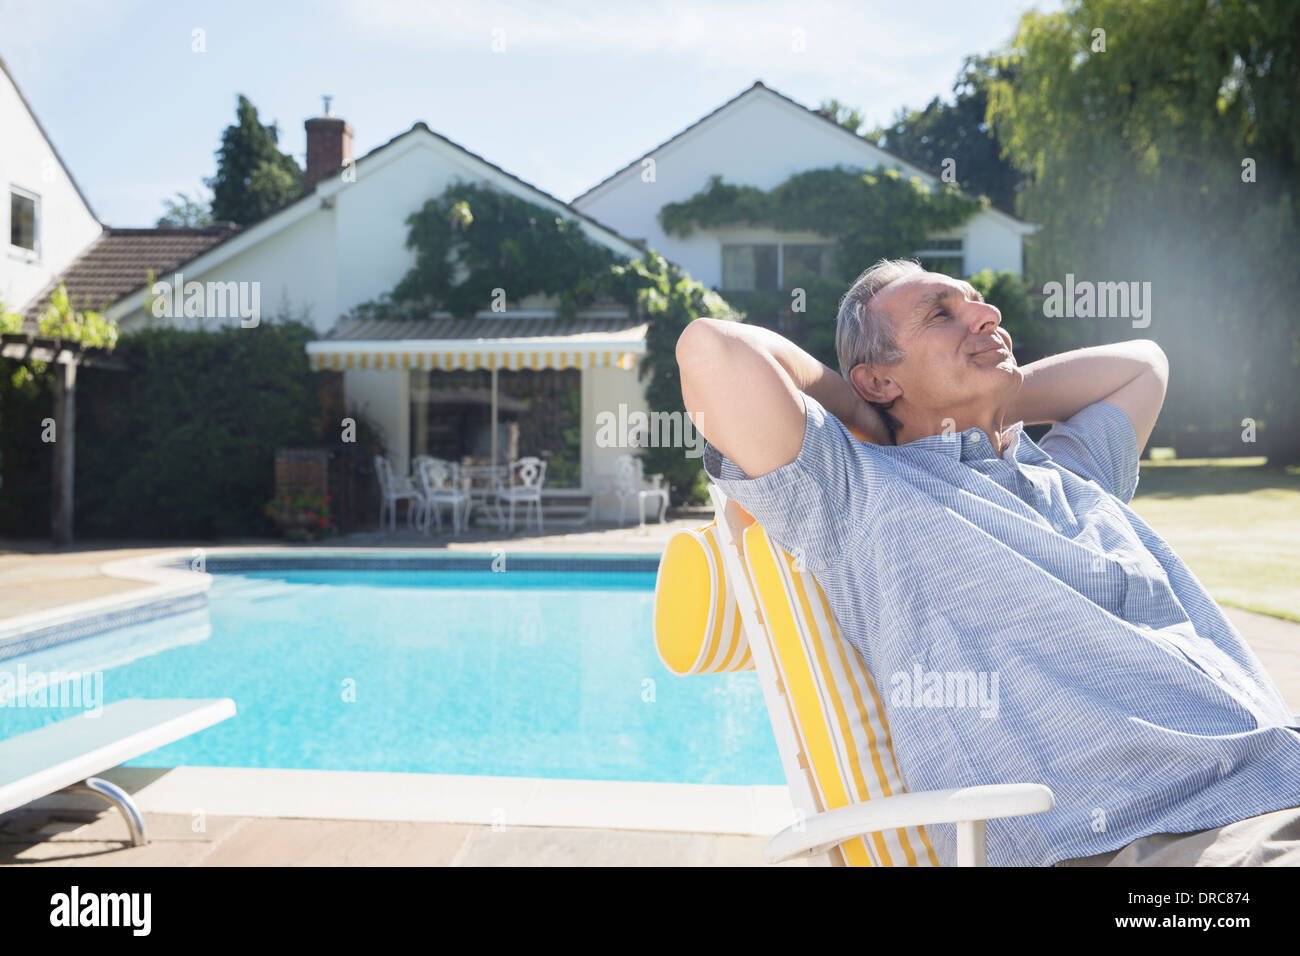 Man relaxing in lounge chair at poolside Stock Photo